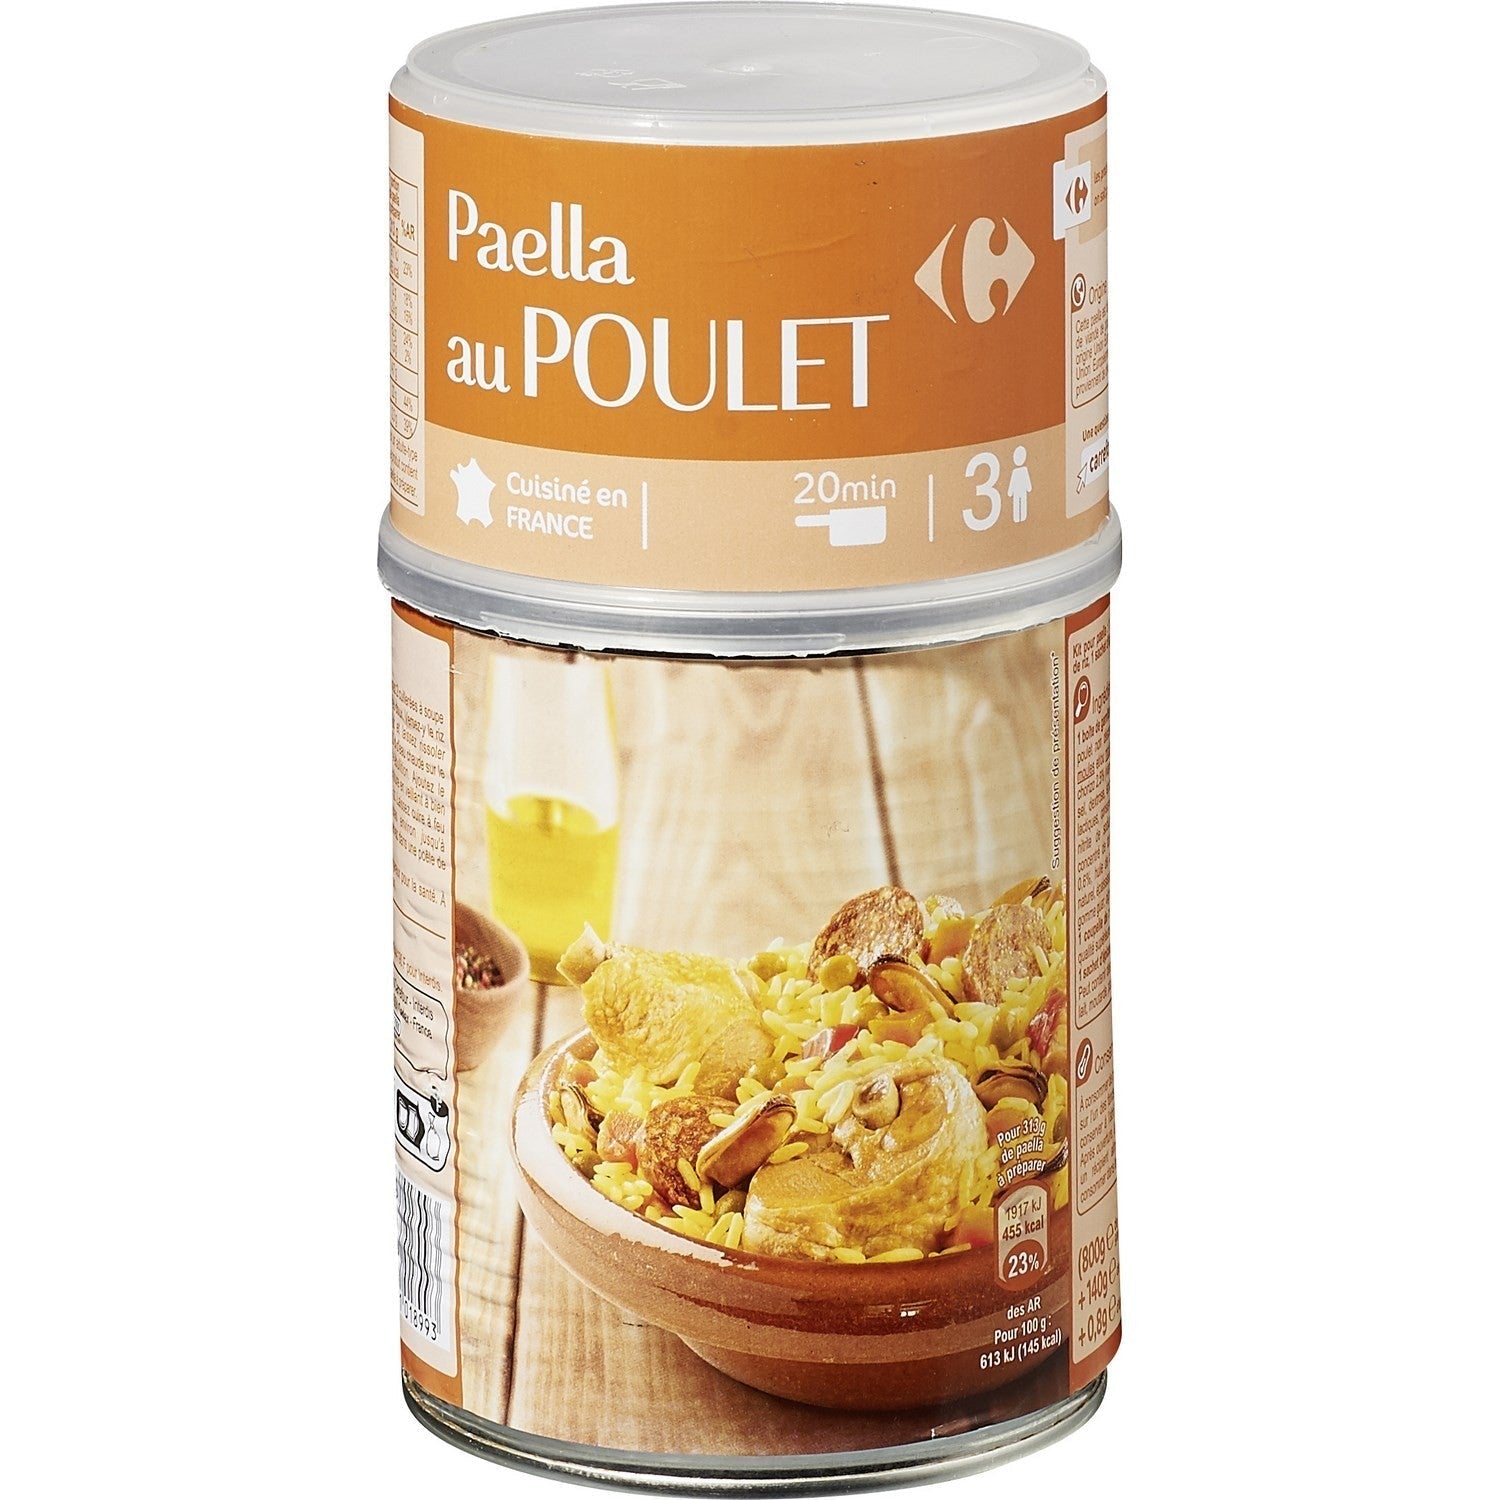 stm>Paella, Carrefour, 3 pers 940gr, can